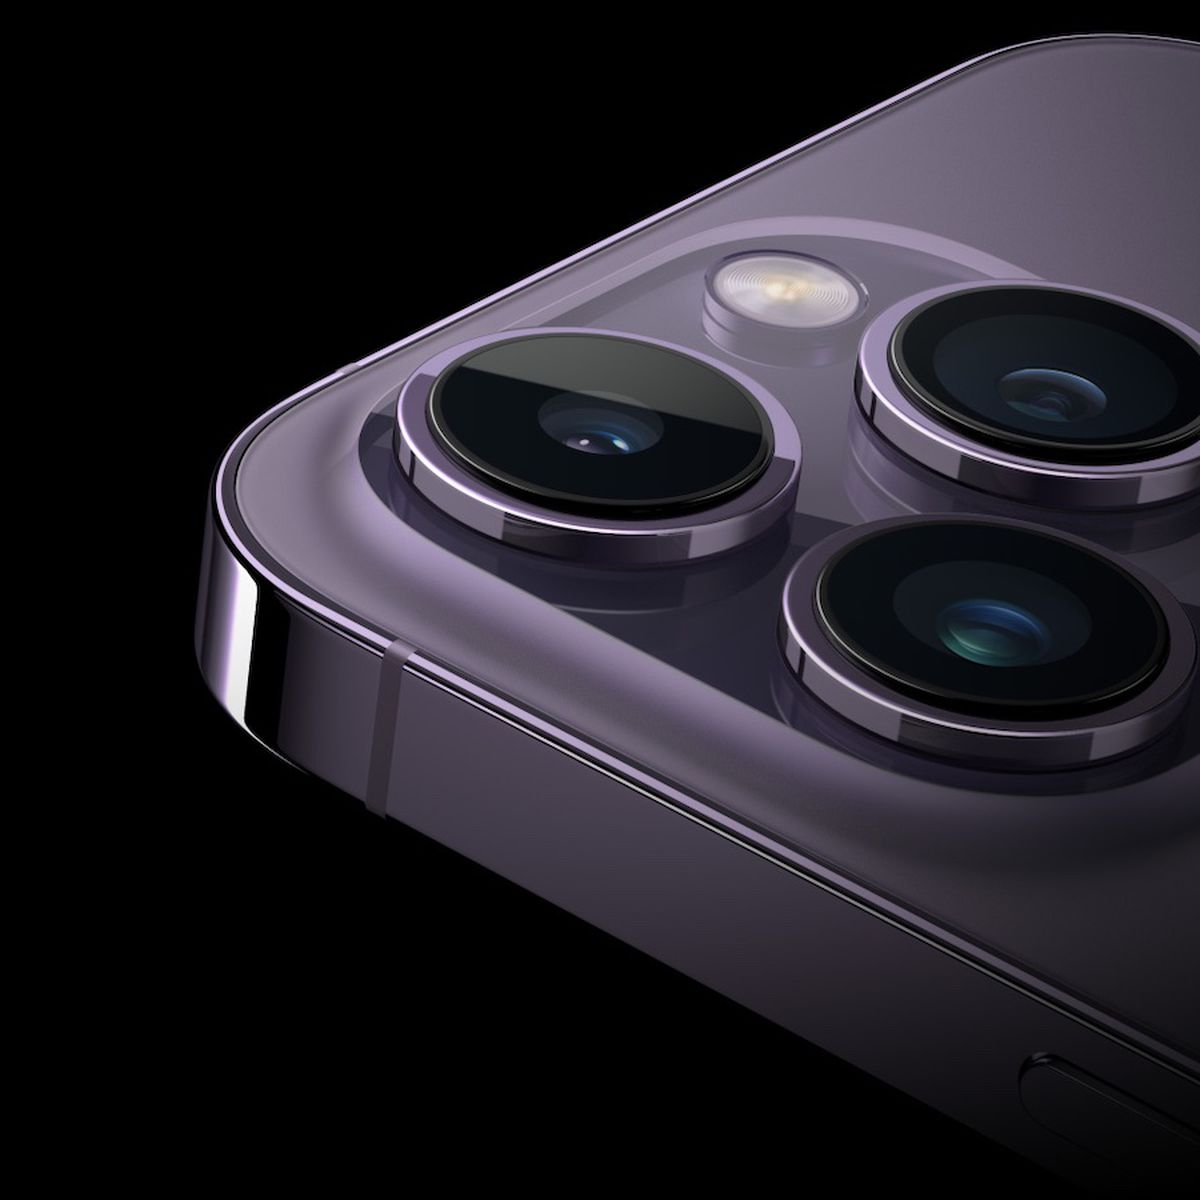 The iPhone 15 Pro has big video camera upgrades – if you know how